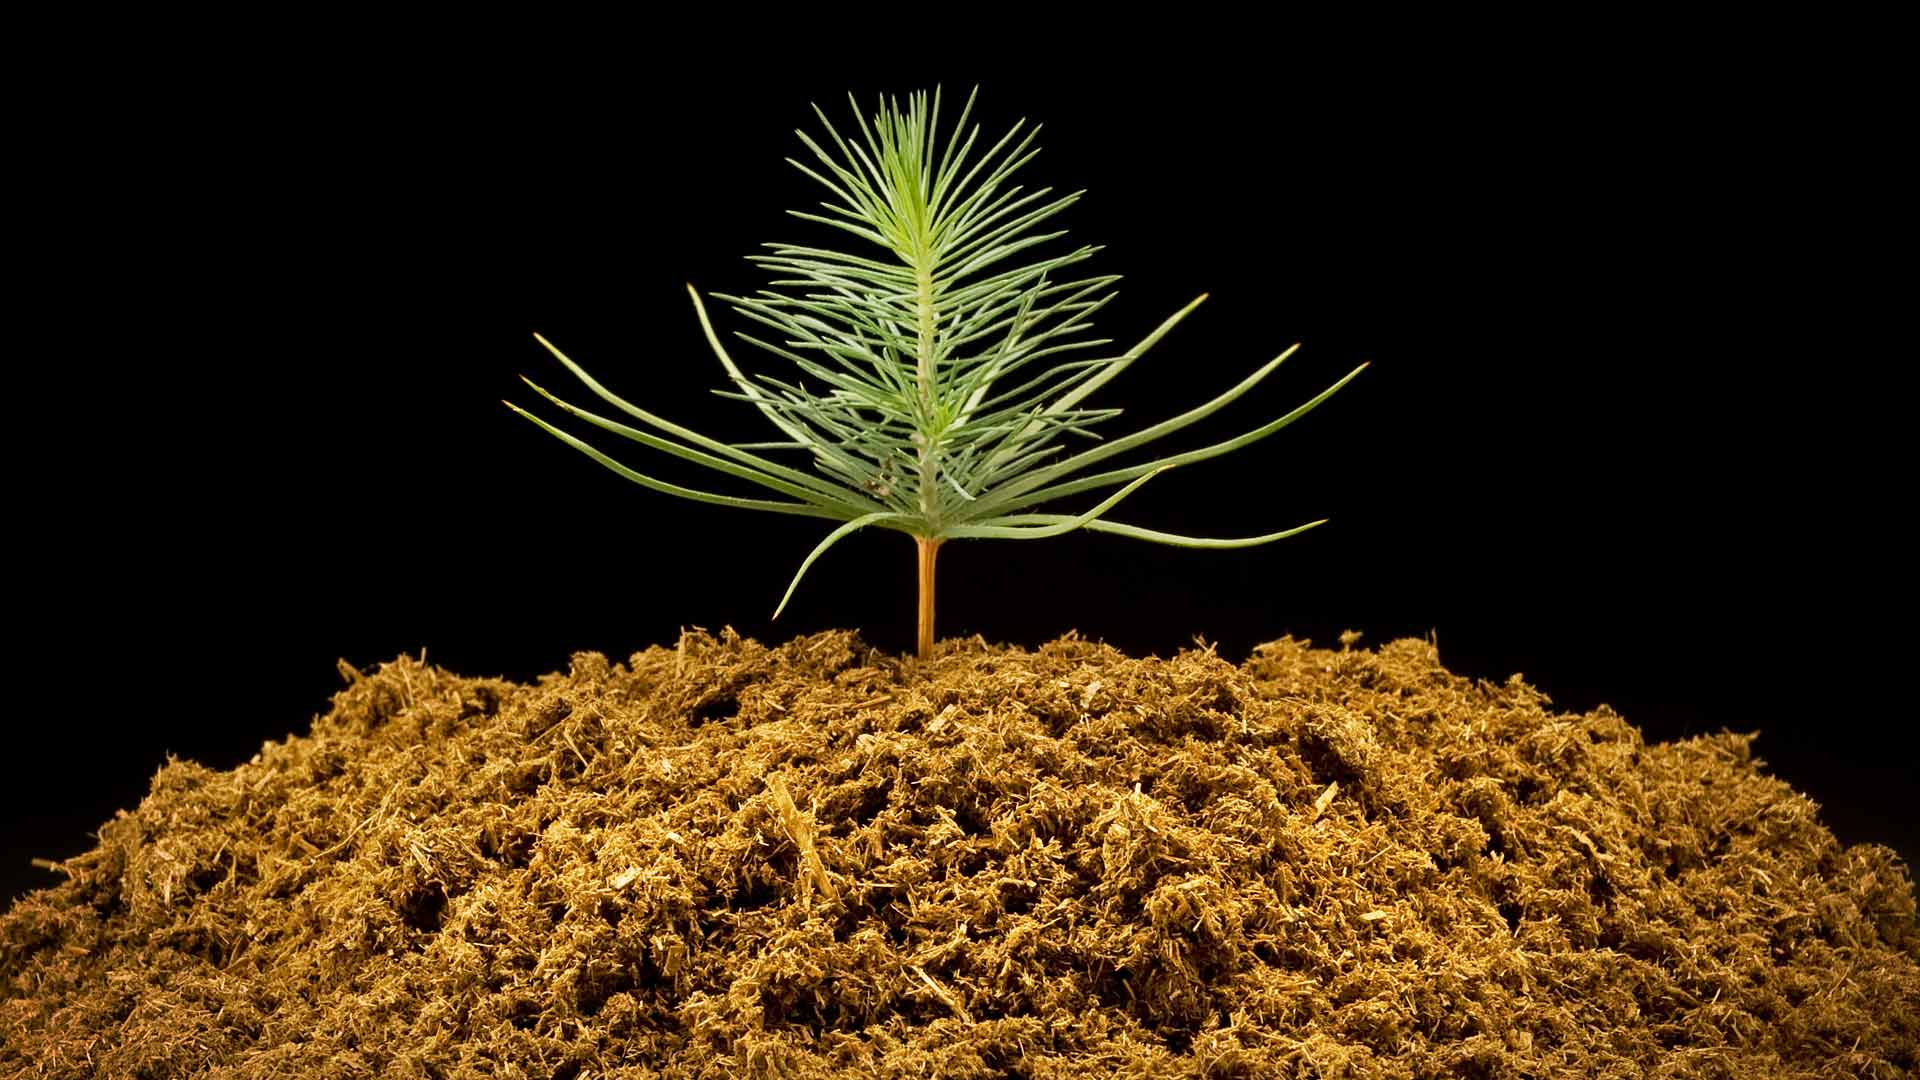 small pine seedling in pile of peat